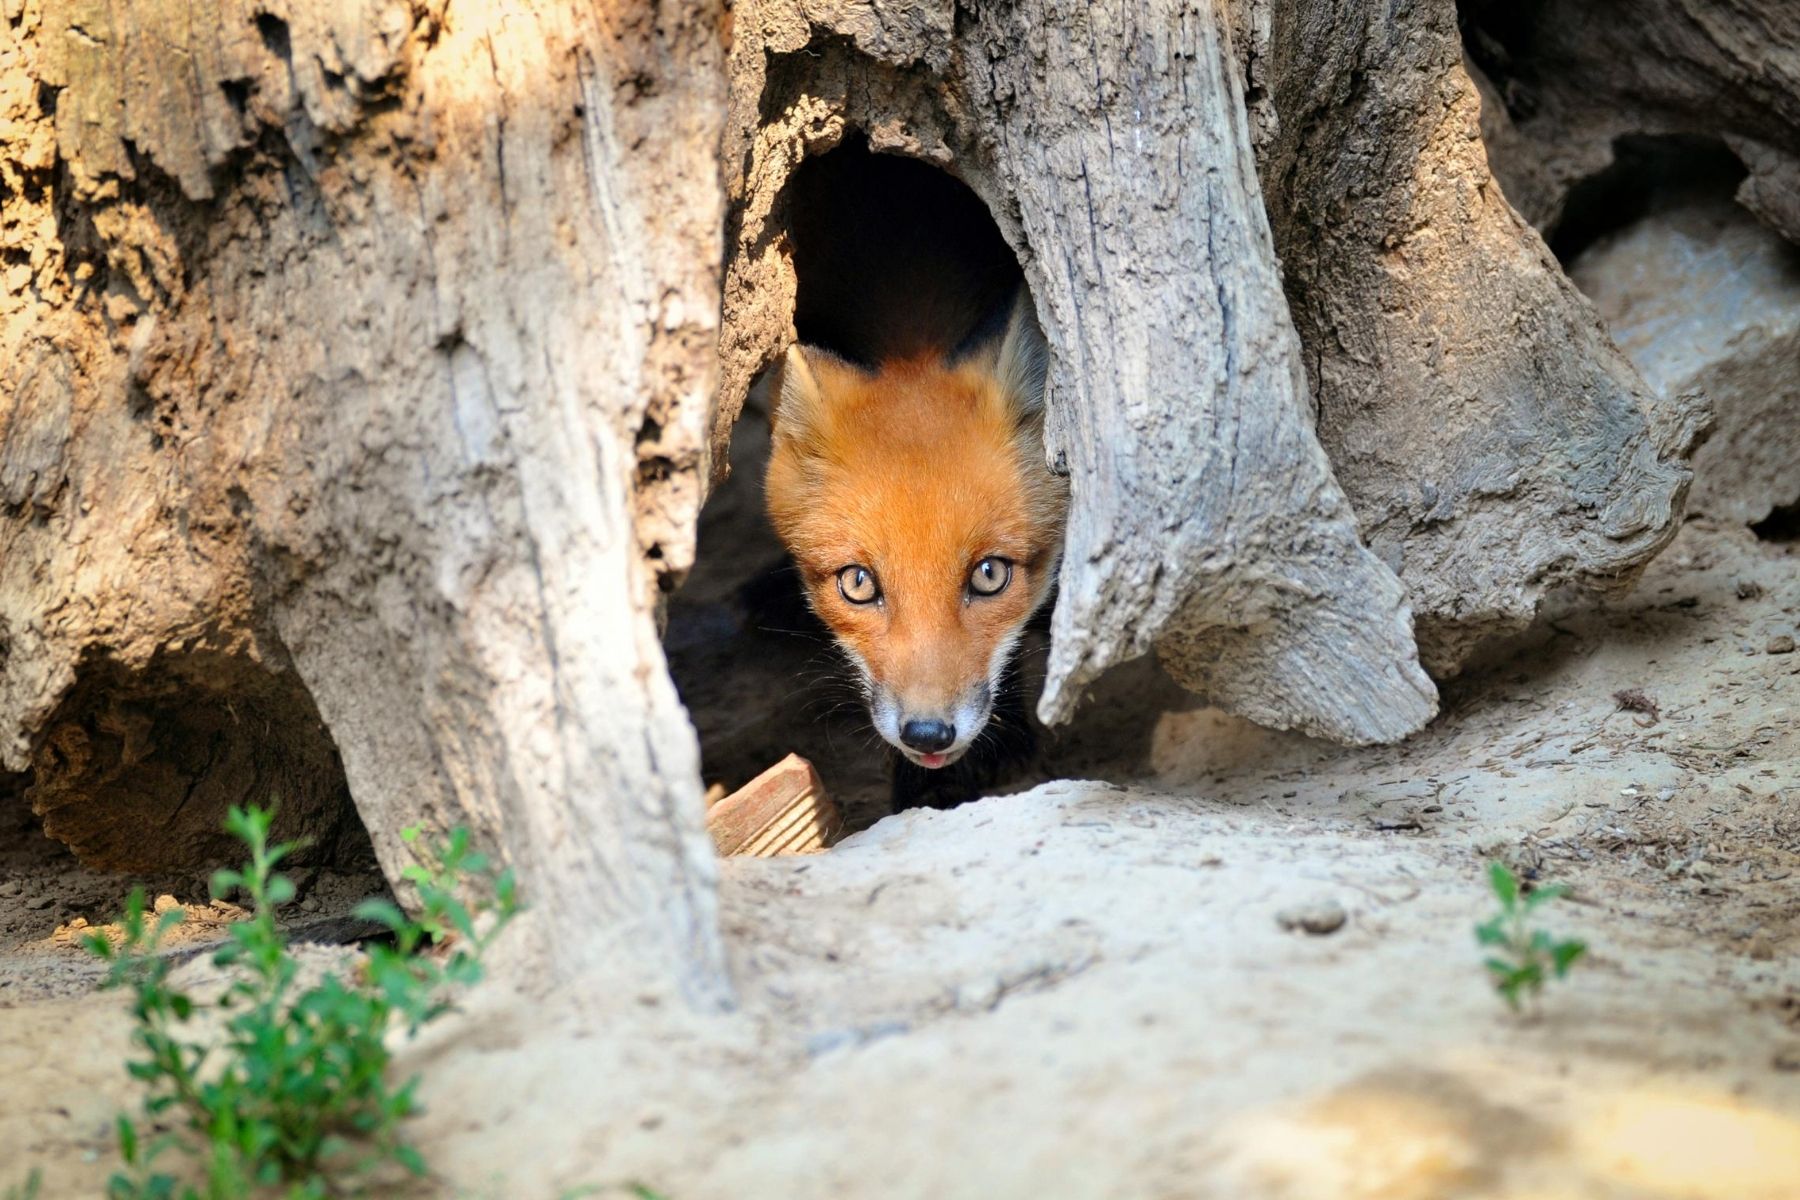 What is the area where a fox makes its den called?